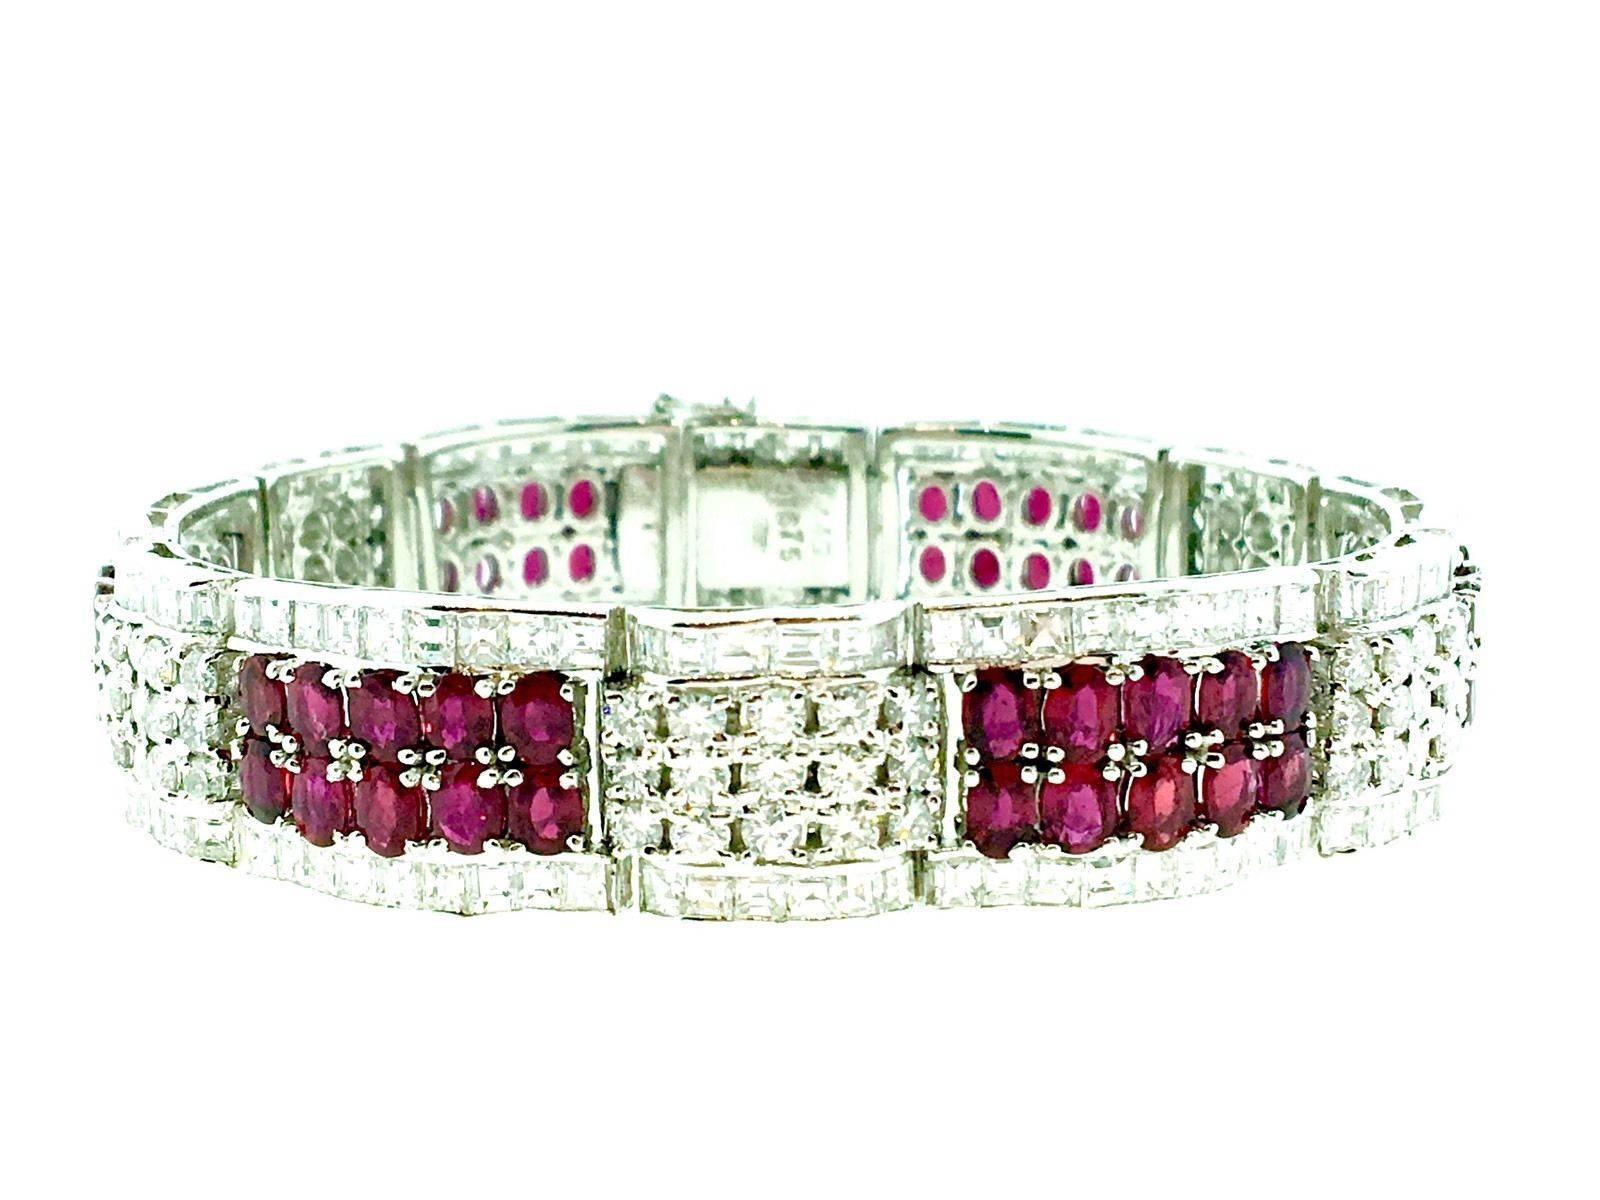 Platinum Ruby and diamond statement bracelet featuring 60 Oval Rubies with rich, deep red color, totaling 14.45 cts and 60 square cut diamonds,
90 round brilliant cut diamonds, VS2 clarity, H color, totaling 16.75 cts. 
Total Stone weight is 31.20